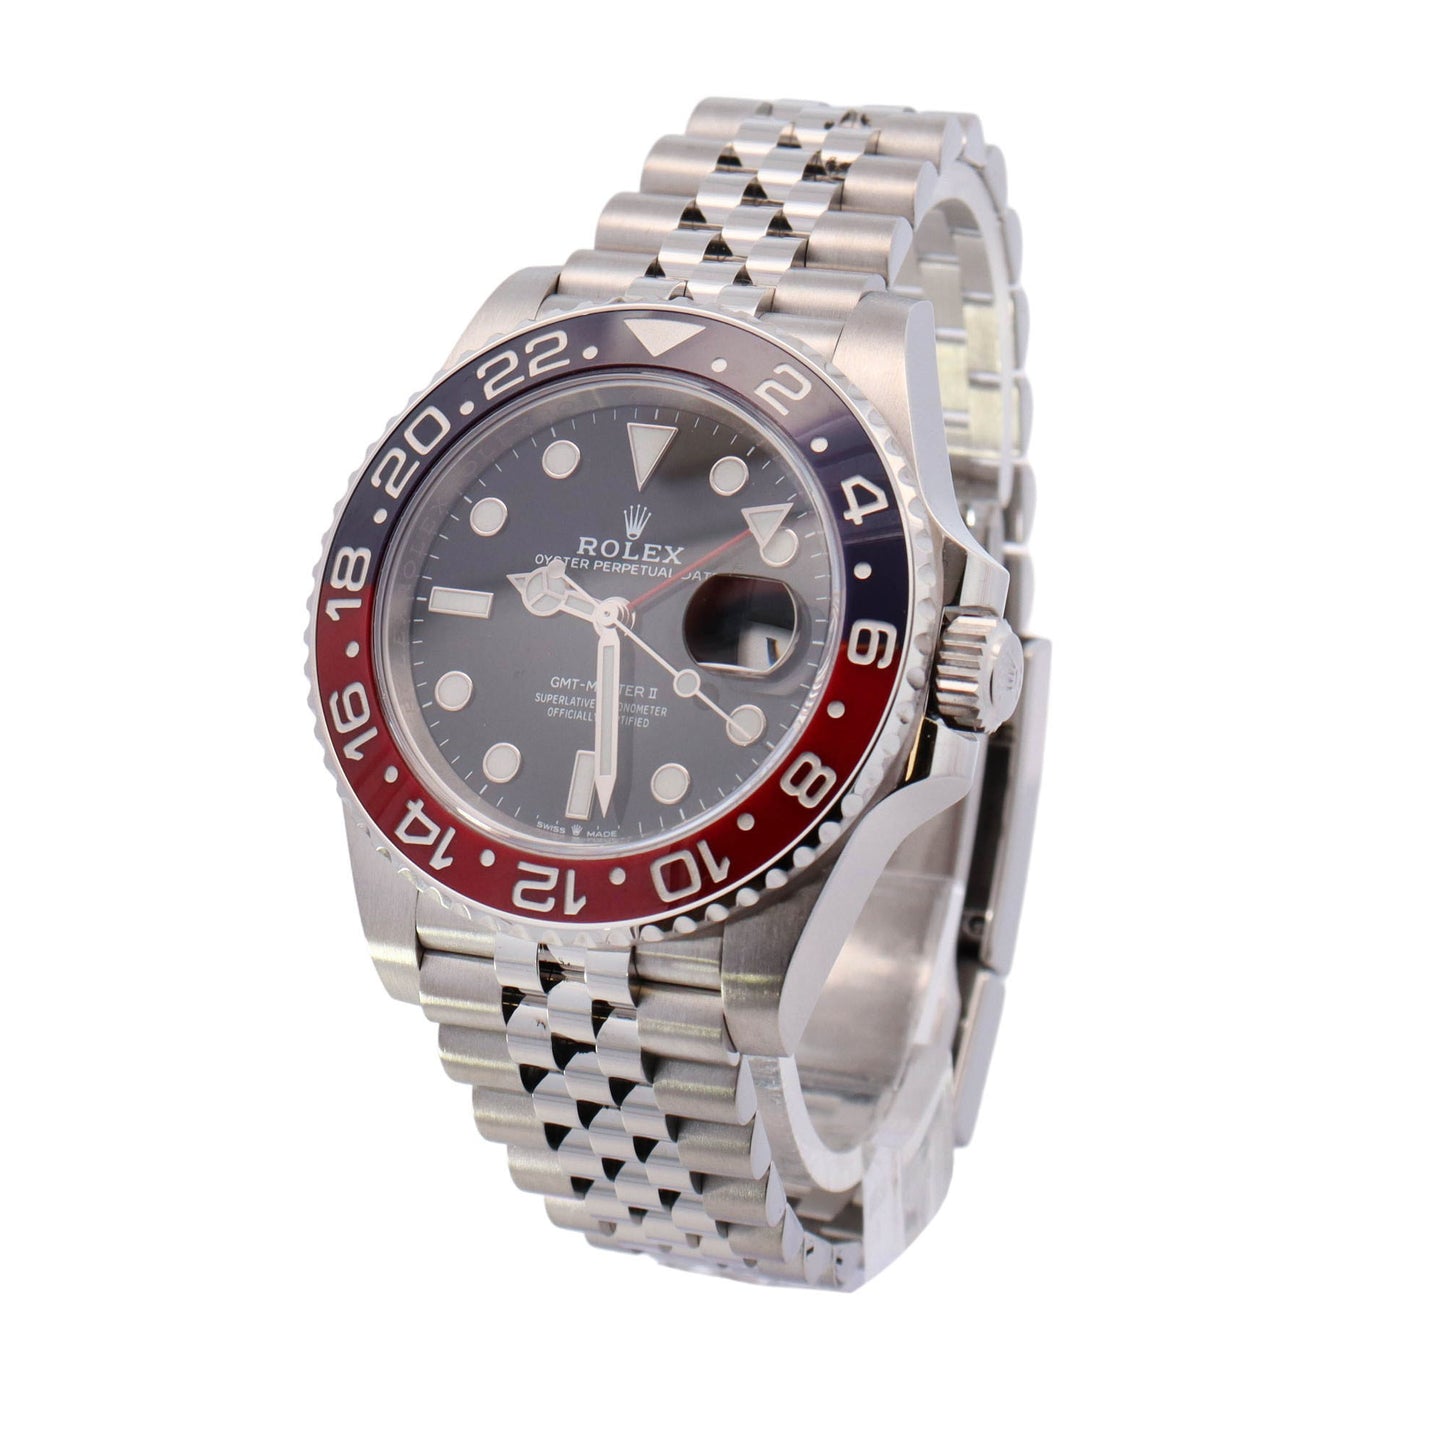 Rolex GMT-Master II "Pepsi" Stainless Steel 40mm Black Dot Dial Watch Reference# 126710BLRO